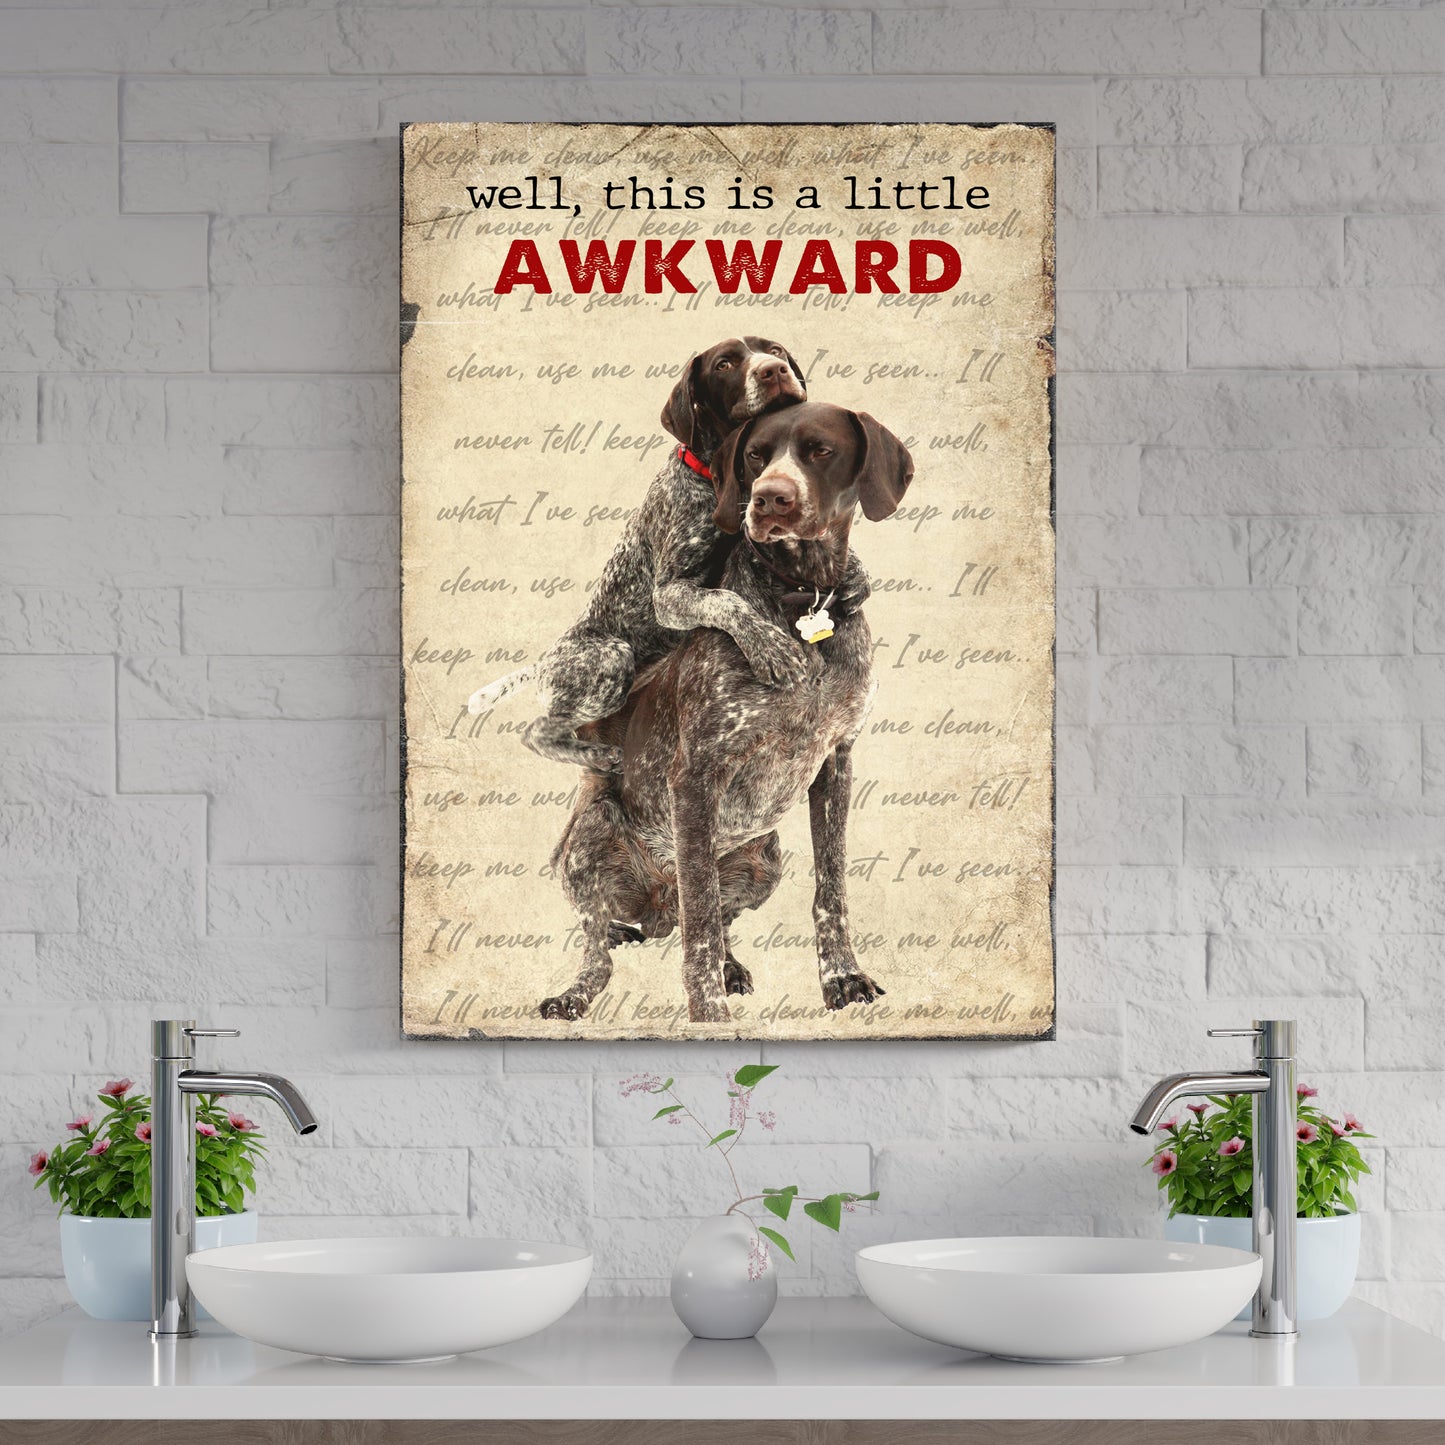 A Little Awkward Bathroom Sign - Image by Tailored Canvases